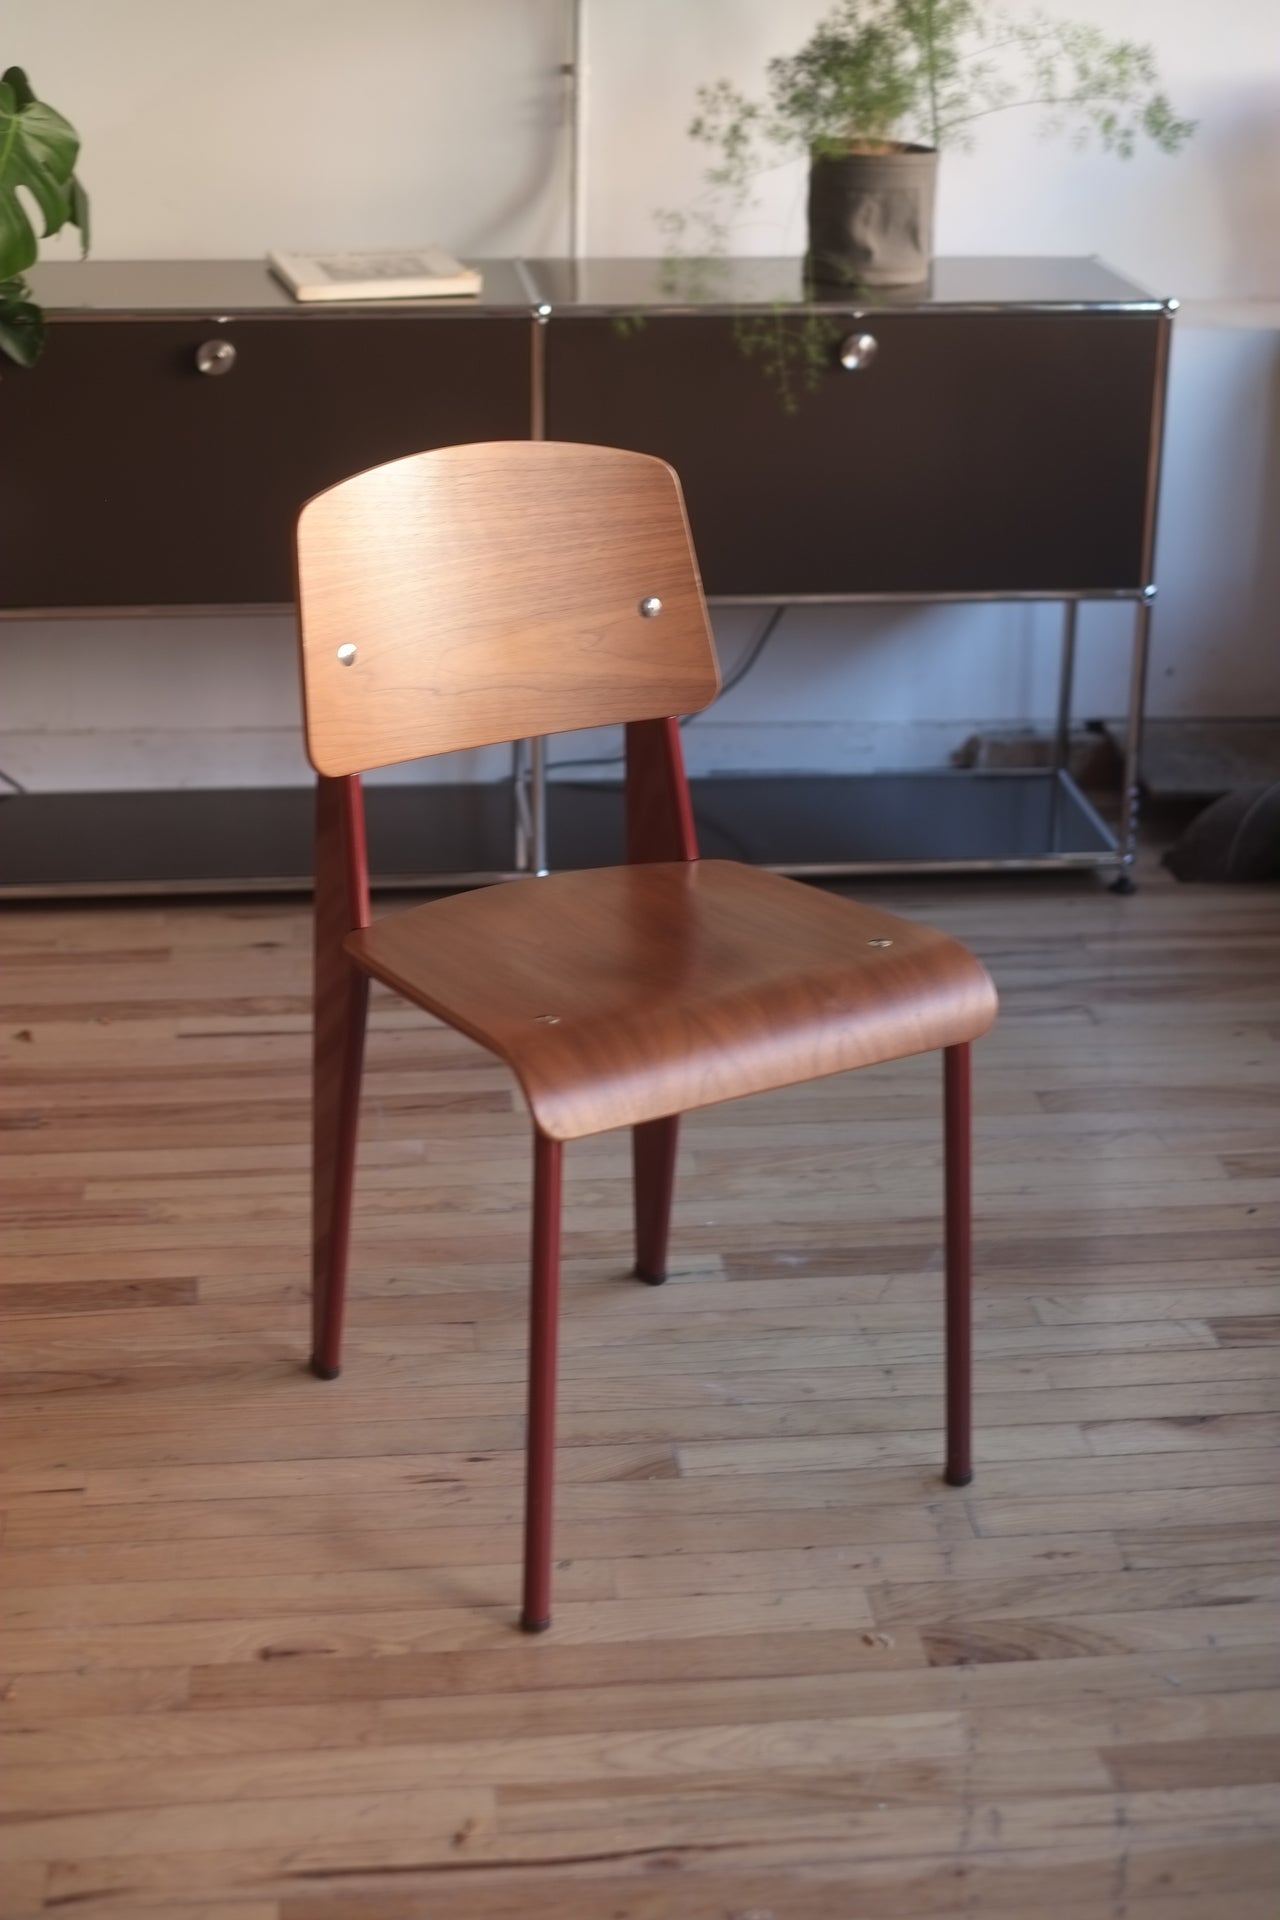 Standard chair by Jean Prouvé for Vitra (Japanese Red)